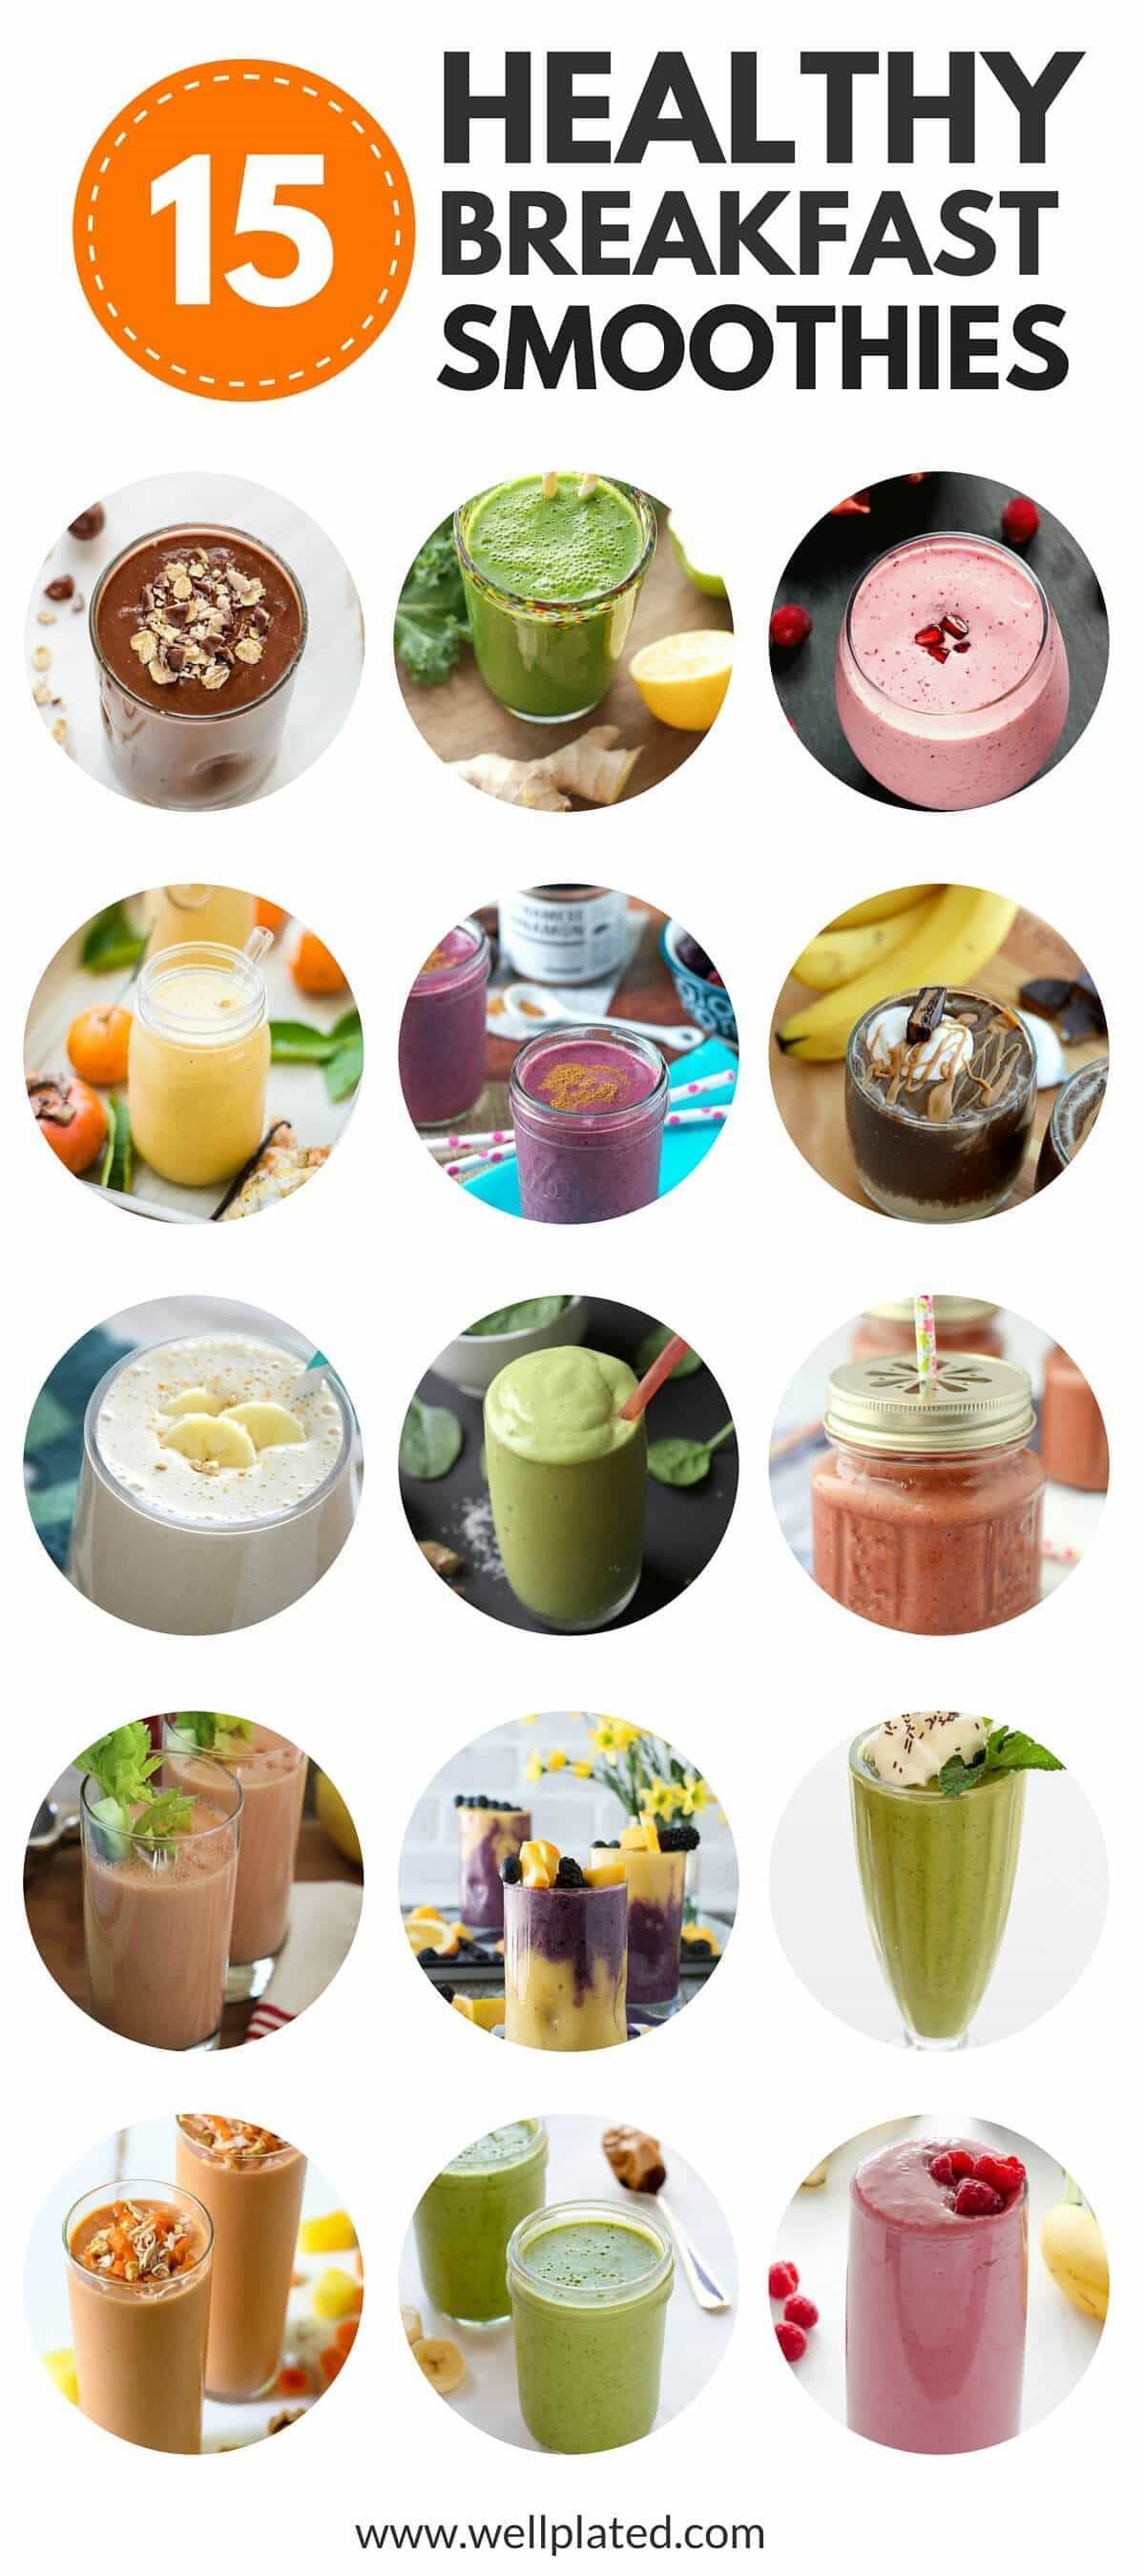 Breakfast Smoothie Recipes For Weight Loss
 The Best 15 Healthy Breakfast Smoothies